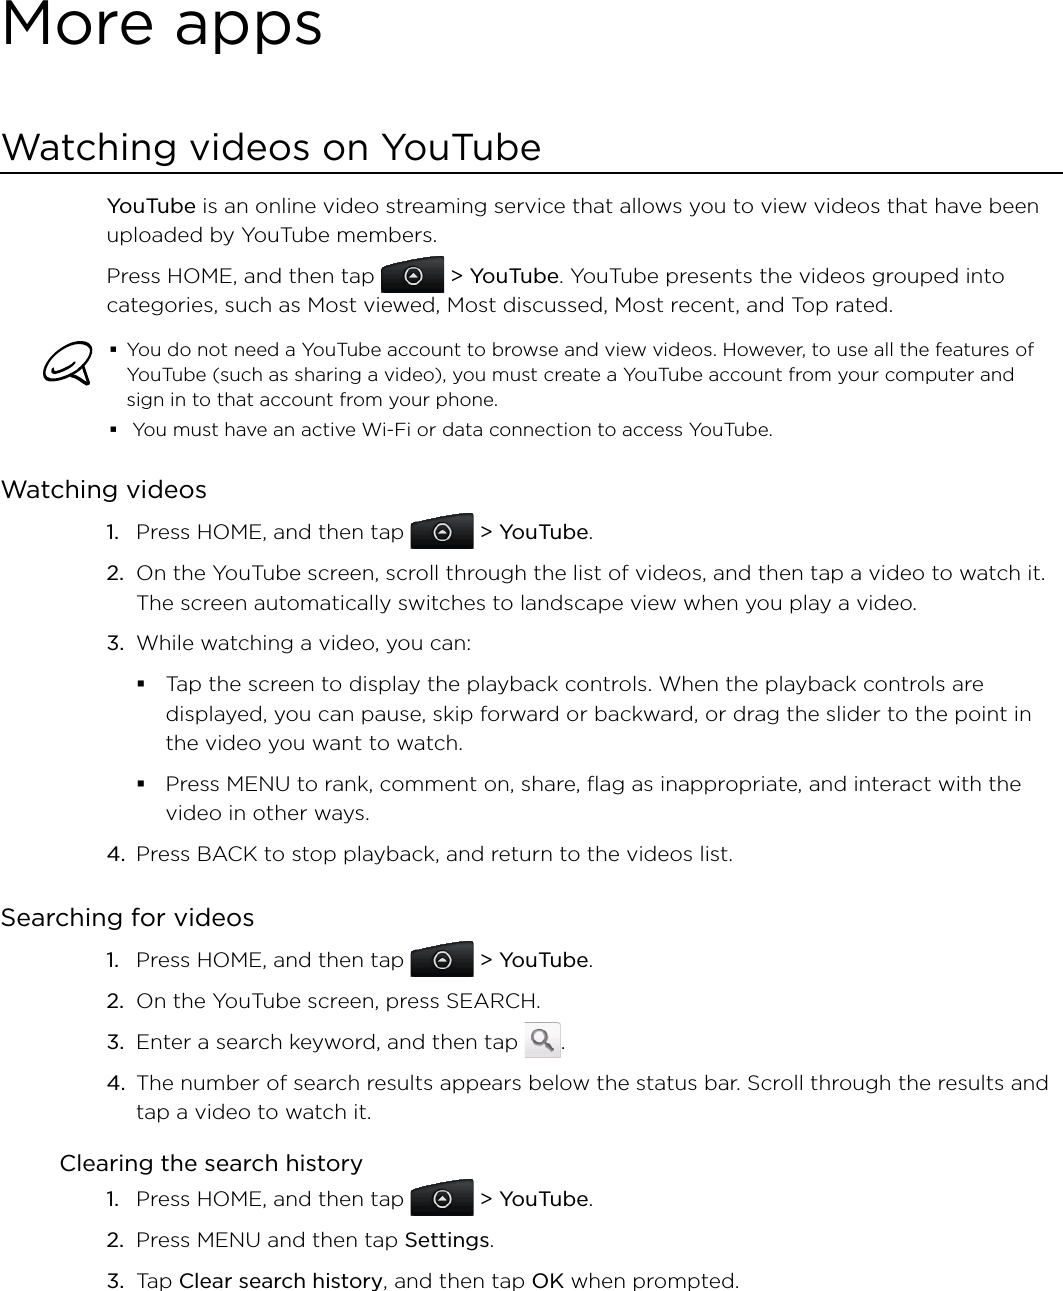 More appsWatching videos on YouTubeYouTube is an online video streaming service that allows you to view videos that have been uploaded by YouTube members.Press HOME, and then tap   &gt; YouTube. YouTube presents the videos grouped into categories, such as Most viewed, Most discussed, Most recent, and Top rated.You do not need a YouTube account to browse and view videos. However, to use all the features of YouTube (such as sharing a video), you must create a YouTube account from your computer and sign in to that account from your phone. You must have an active Wi-Fi or data connection to access YouTube.Watching videosPress HOME, and then tap   &gt; YouTube.On the YouTube screen, scroll through the list of videos, and then tap a video to watch it. The screen automatically switches to landscape view when you play a video.While watching a video, you can: Tap the screen to display the playback controls. When the playback controls are displayed, you can pause, skip forward or backward, or drag the slider to the point in the video you want to watch.Press MENU to rank, comment on, share, flag as inappropriate, and interact with the video in other ways.4. Press BACK to stop playback, and return to the videos list.Searching for videosPress HOME, and then tap   &gt; YouTube. On the YouTube screen, press SEARCH.Enter a search keyword, and then tap  .The number of search results appears below the status bar. Scroll through the results and tap a video to watch it.Clearing the search historyPress HOME, and then tap   &gt; YouTube.Press MENU and then tap Settings. Tap Clear search history, and then tap OK when prompted.1.2.3.1.2.3.4.1.2.3.